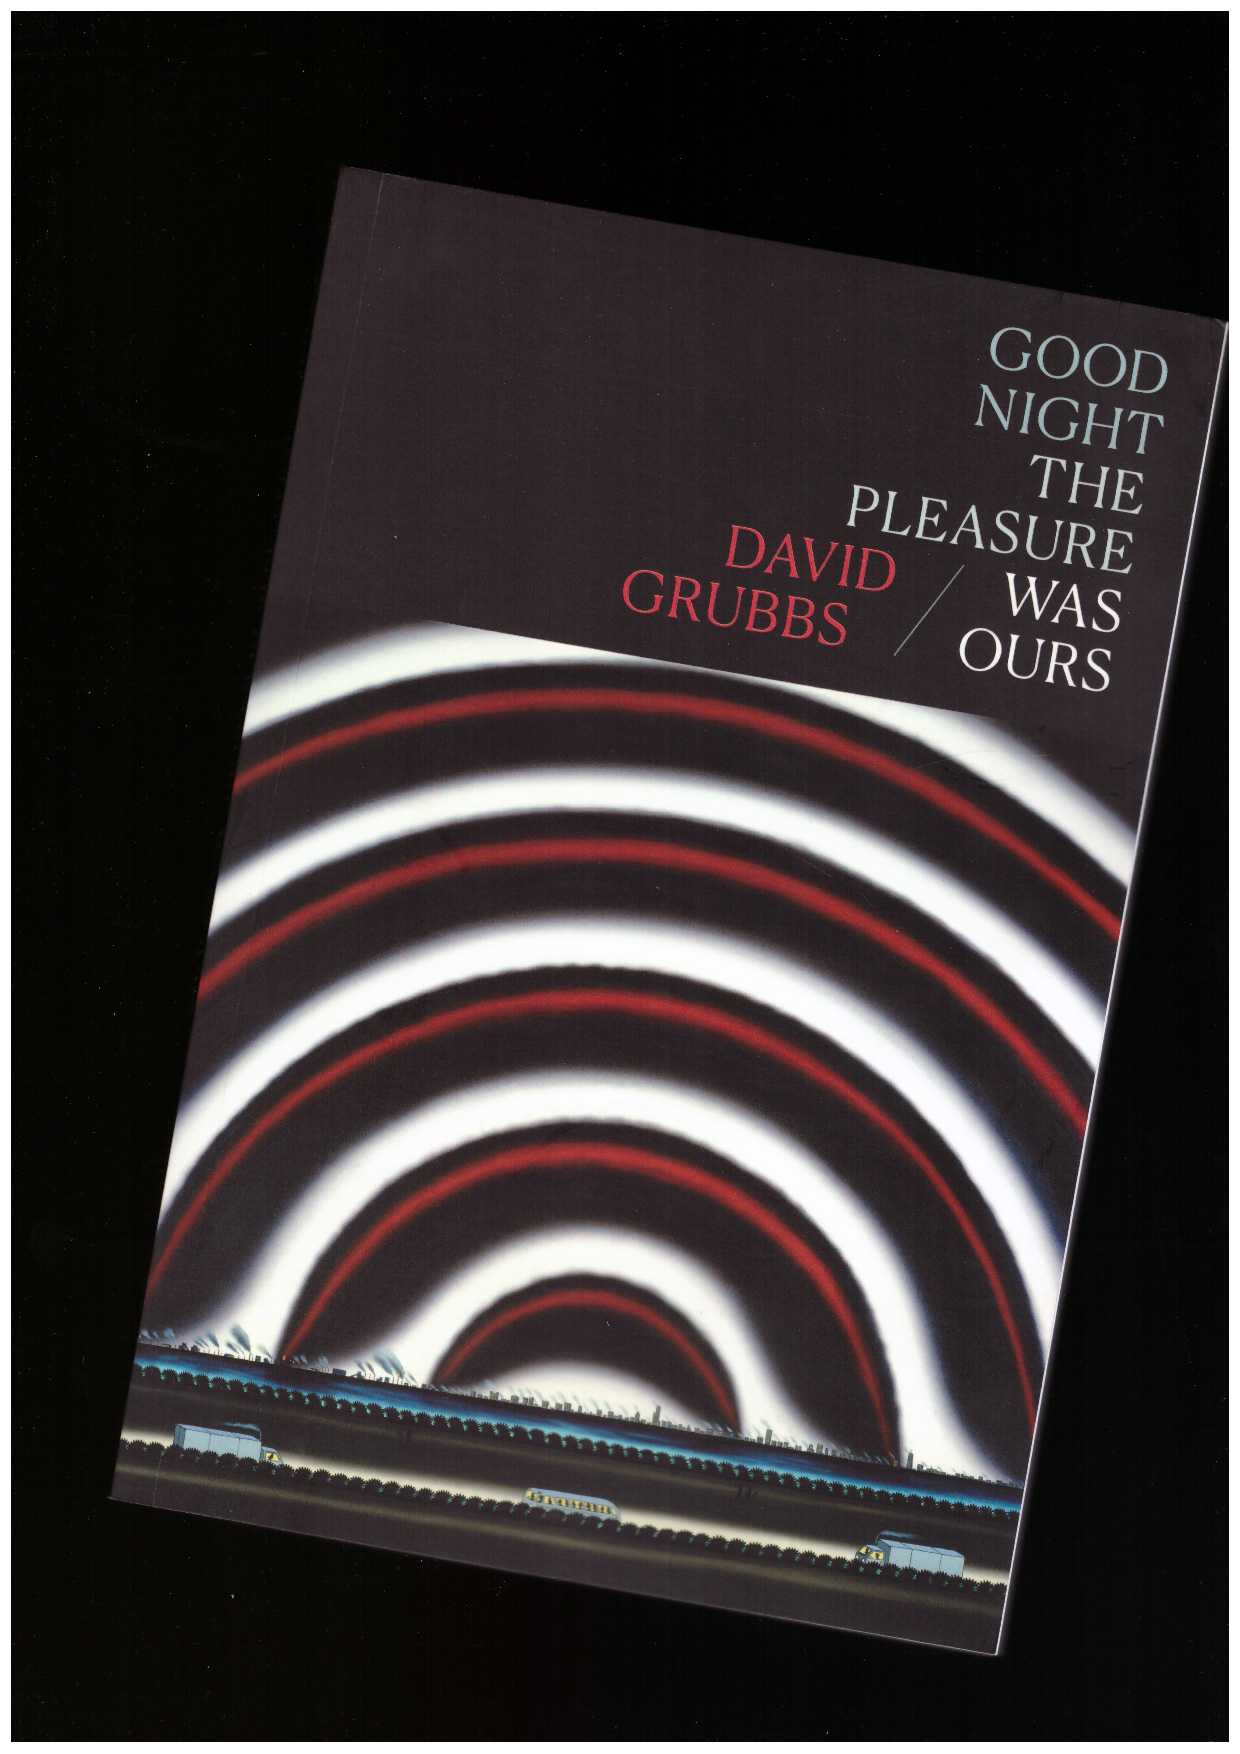 GRUBBS, David - Good night the pleasure was ours